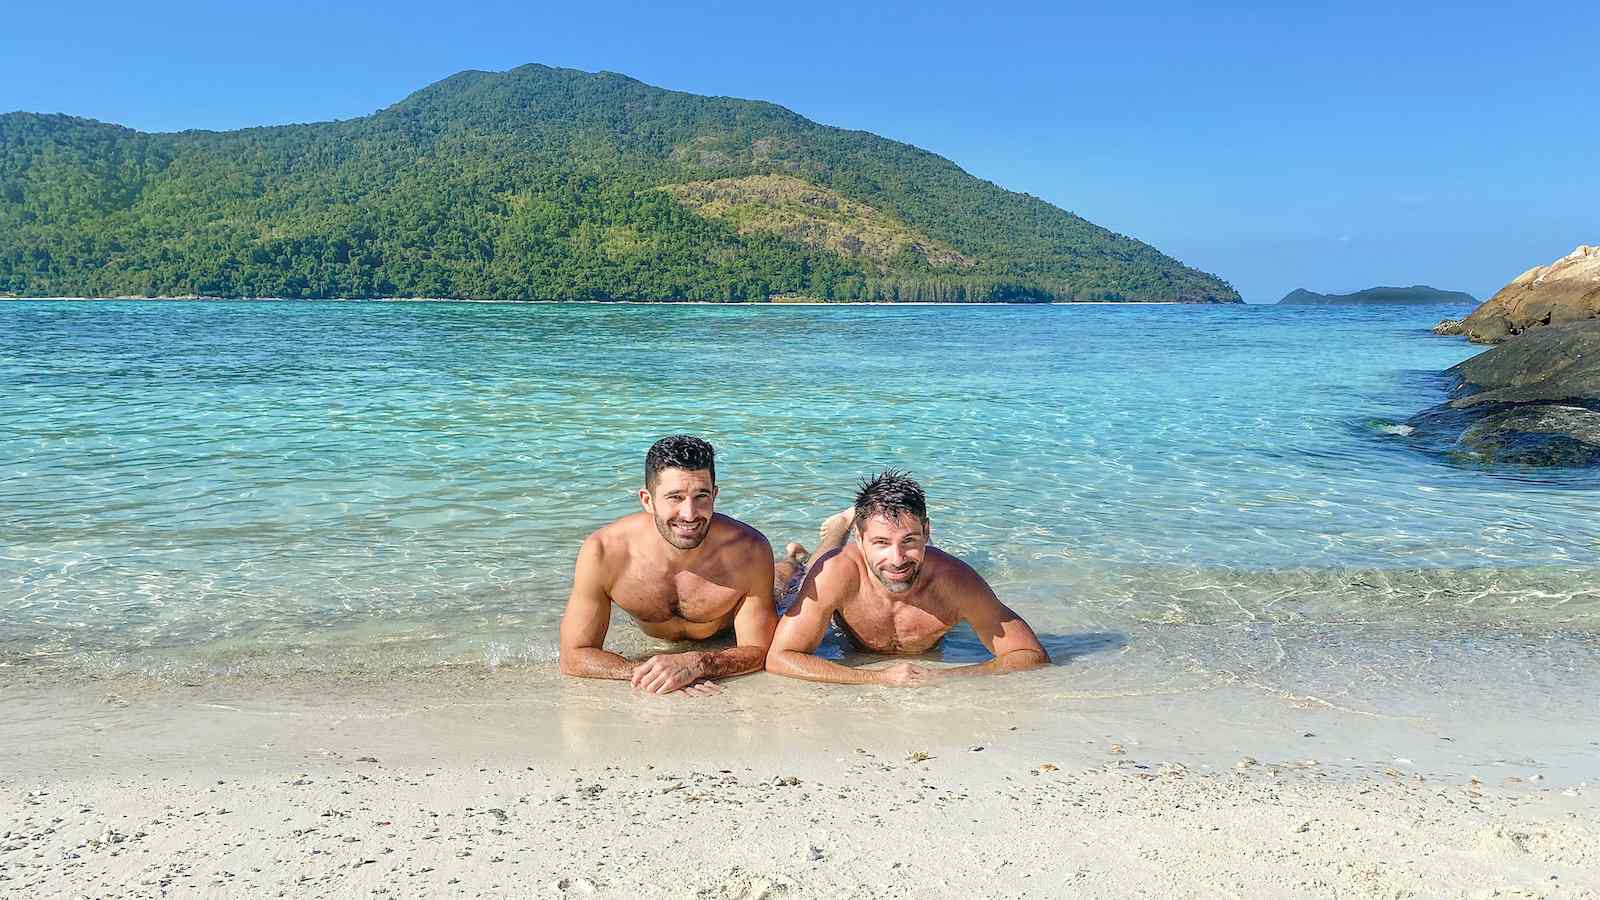 Phuket is one of the gayest islands in the world